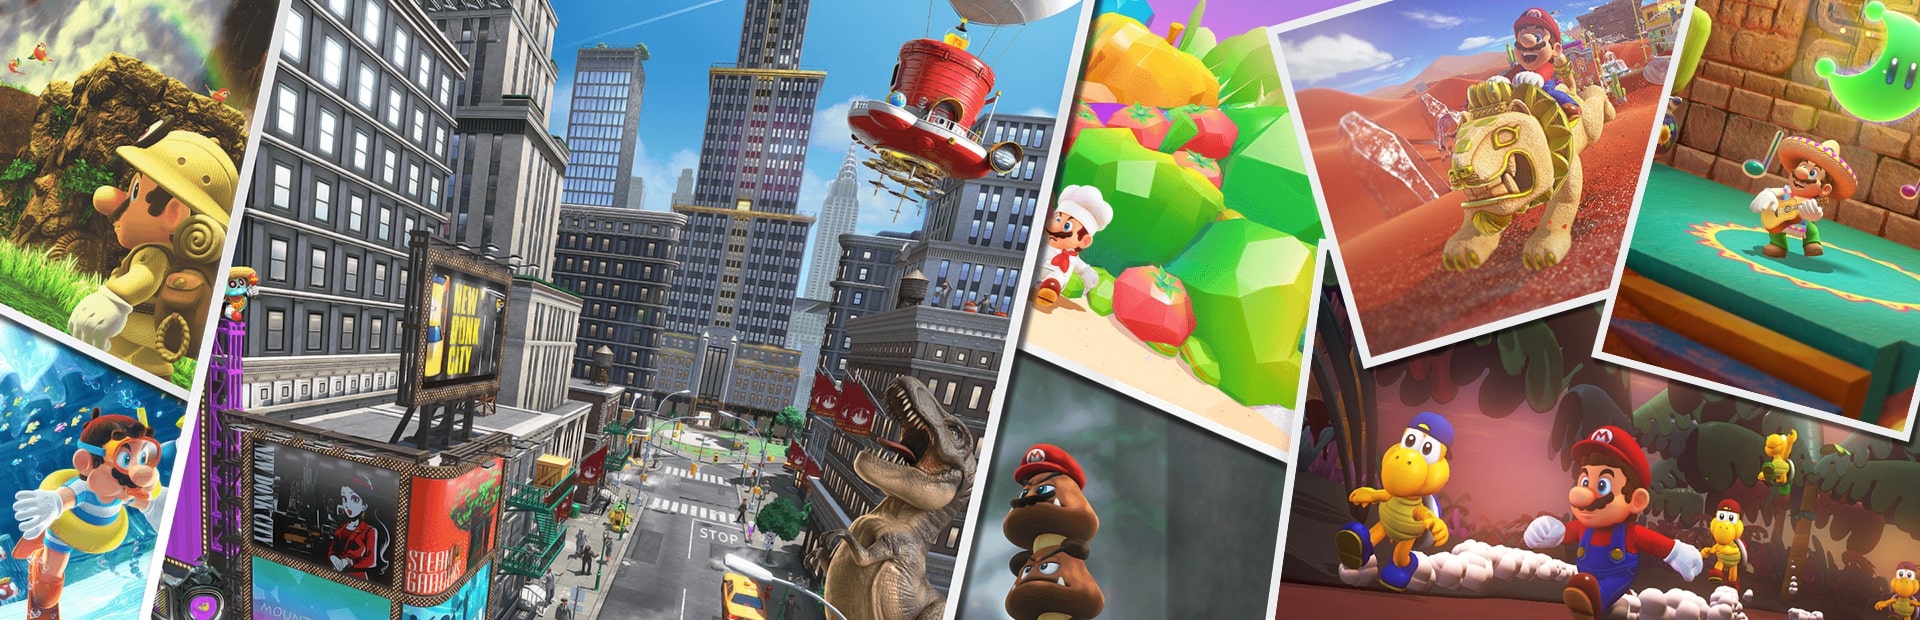 Super Mario Odyssey Review: A Compelling Adventure in a New 3D World